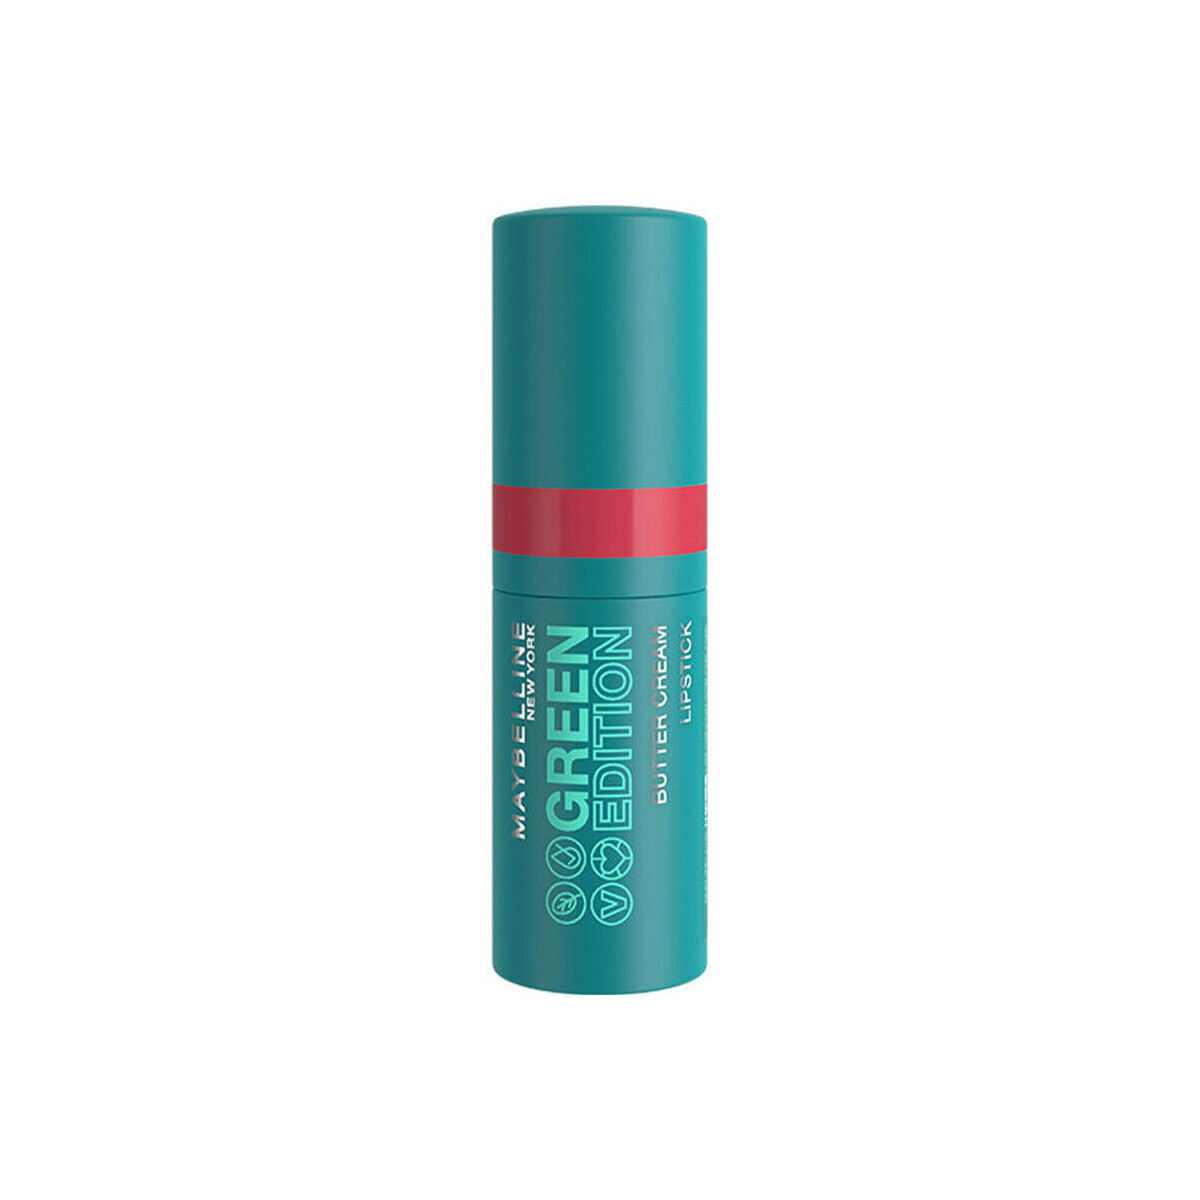 Belleza Mujer Pintalabios Maybelline New York Green Edition Butter Cream Lipstick 008-floral 10 Gr 